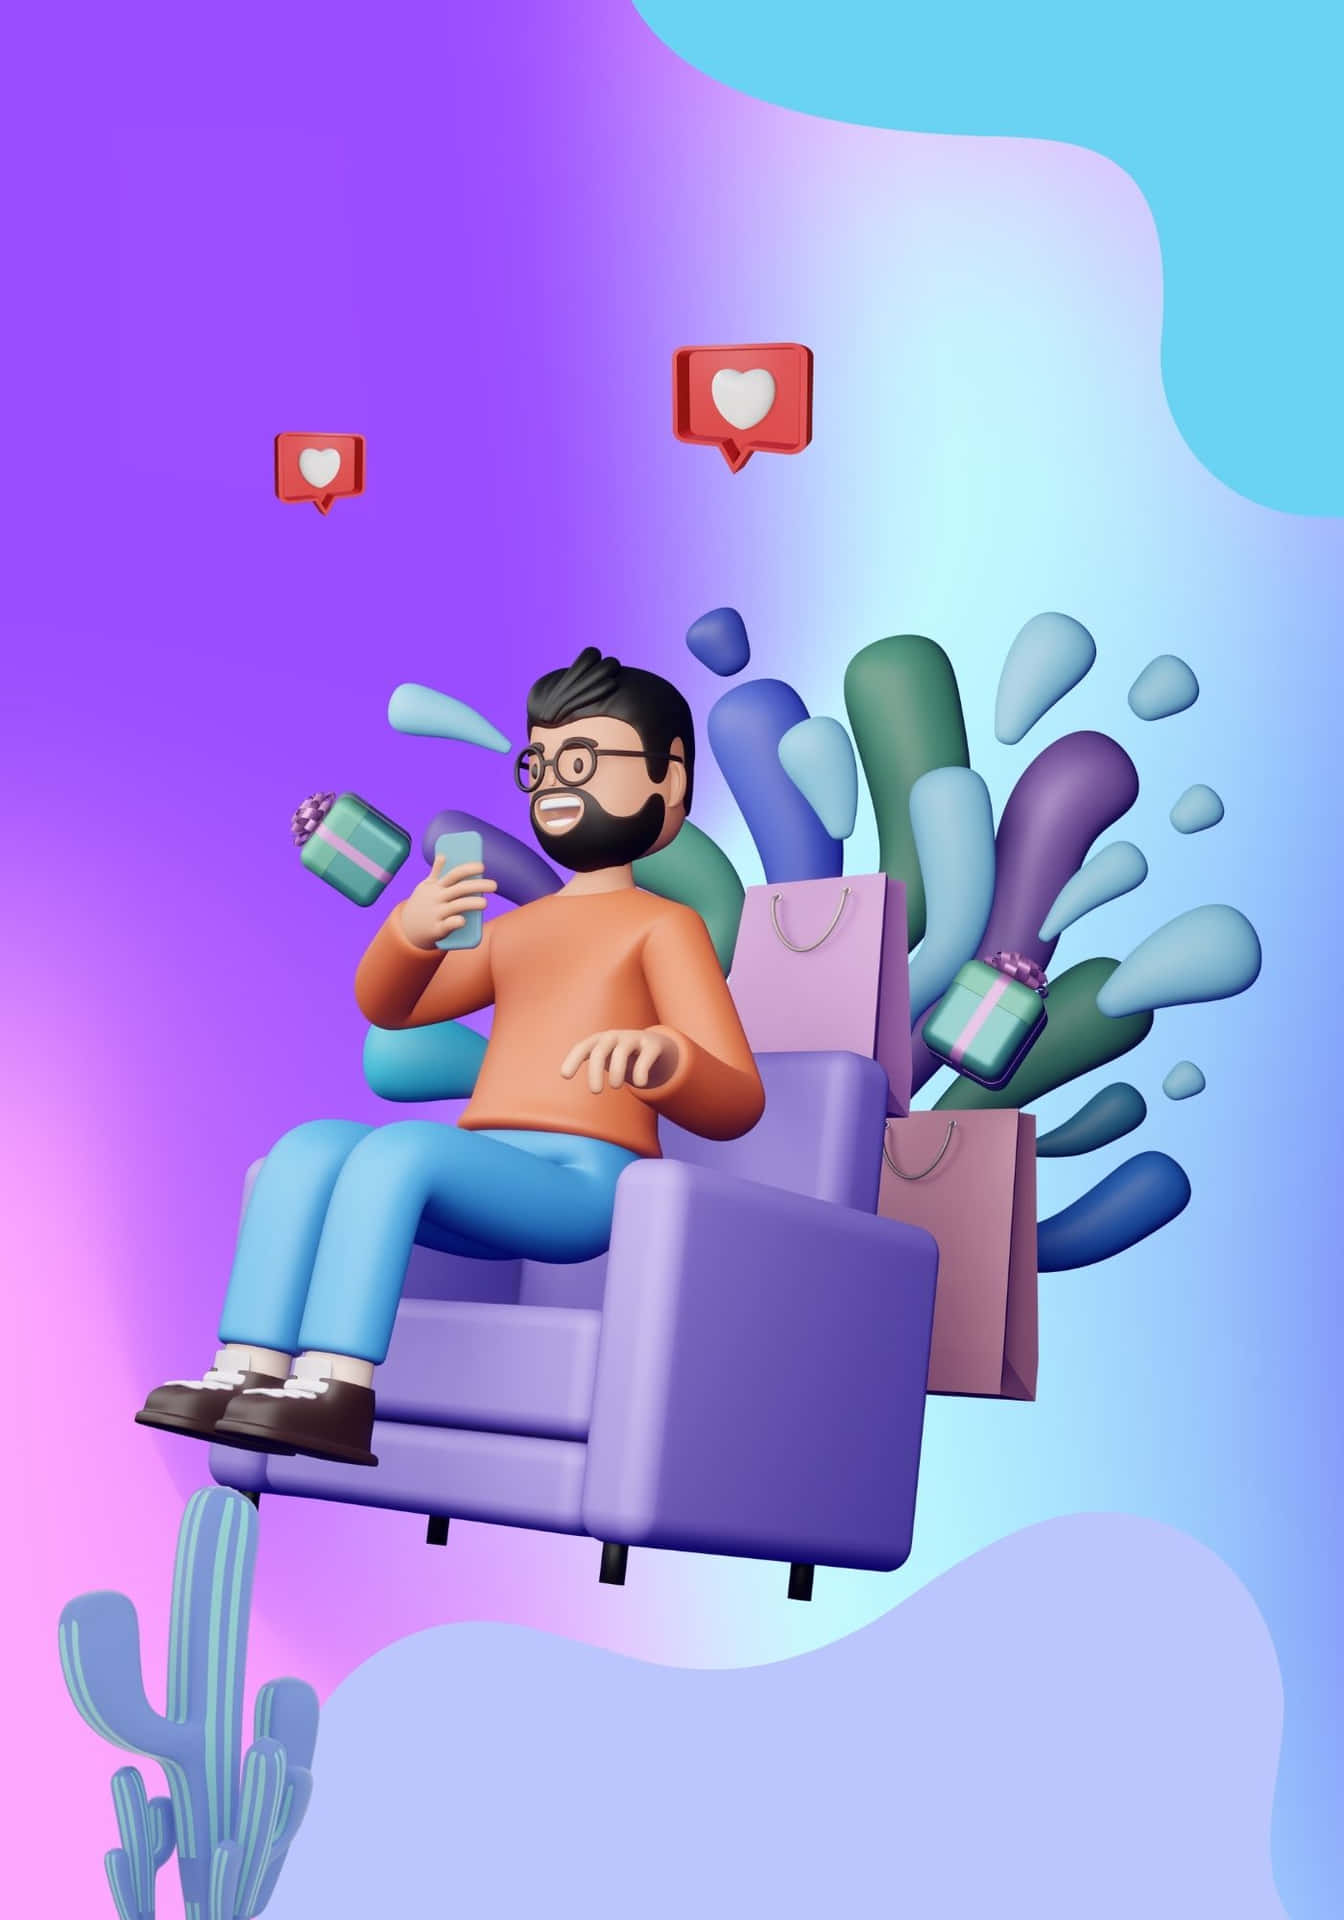 Cool 3D Man On Couch Background